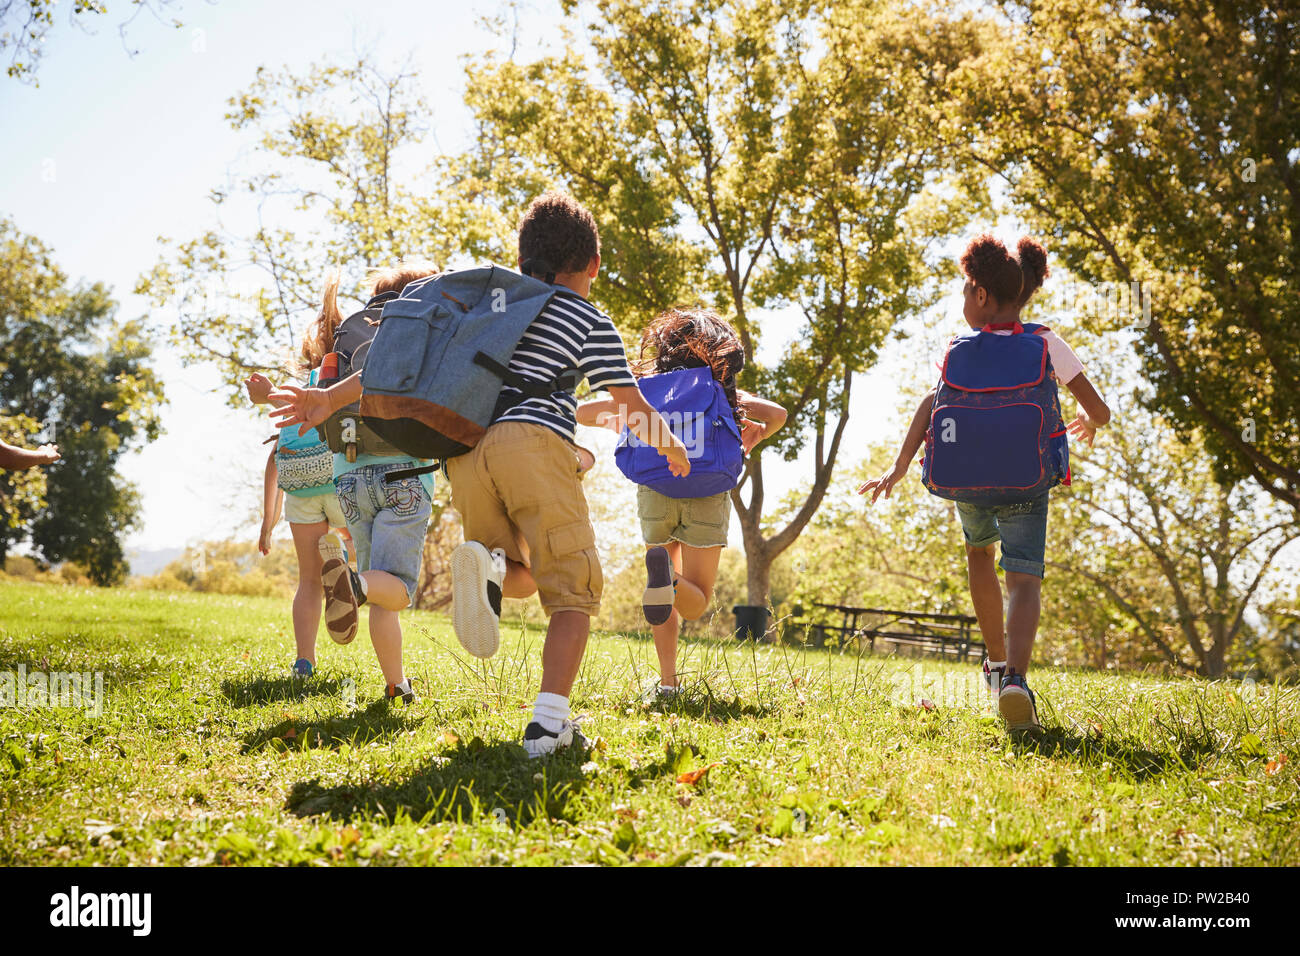 Five school kids running in a field, back view, close up Stock Photo